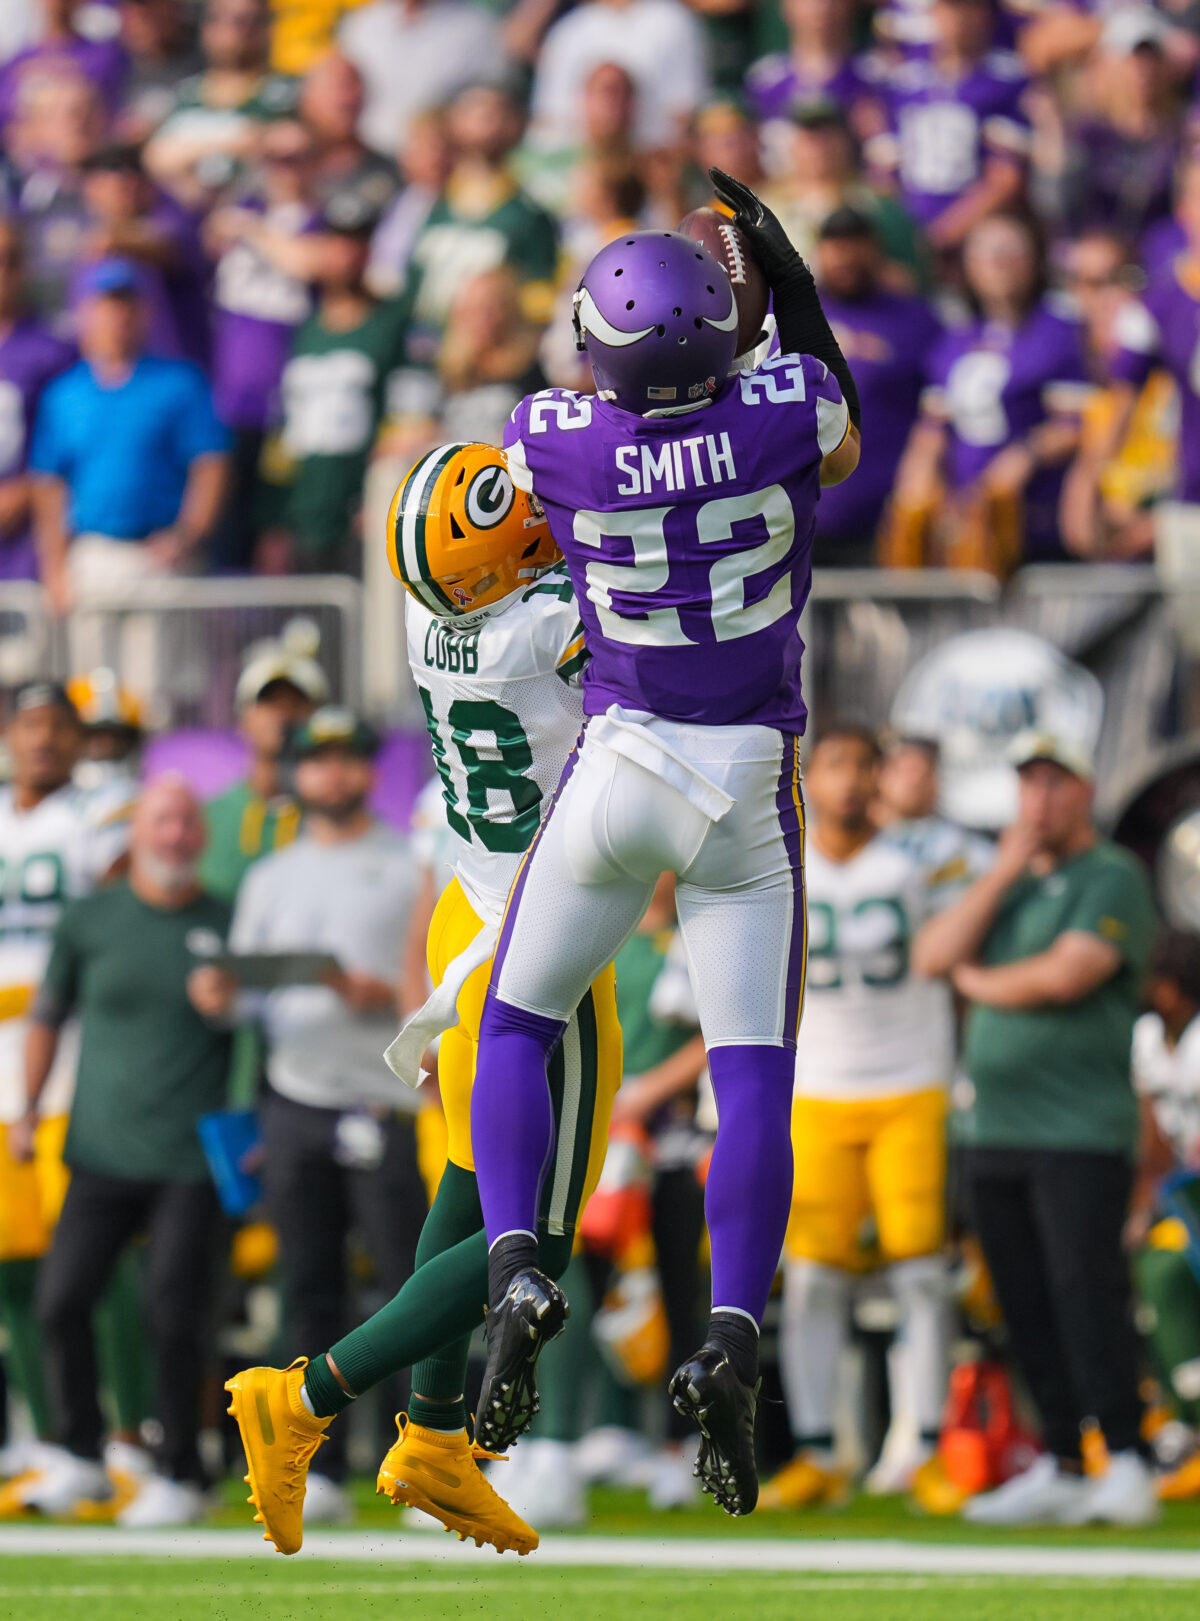 Harrison Smith likely out for Sunday’s game vs Lions